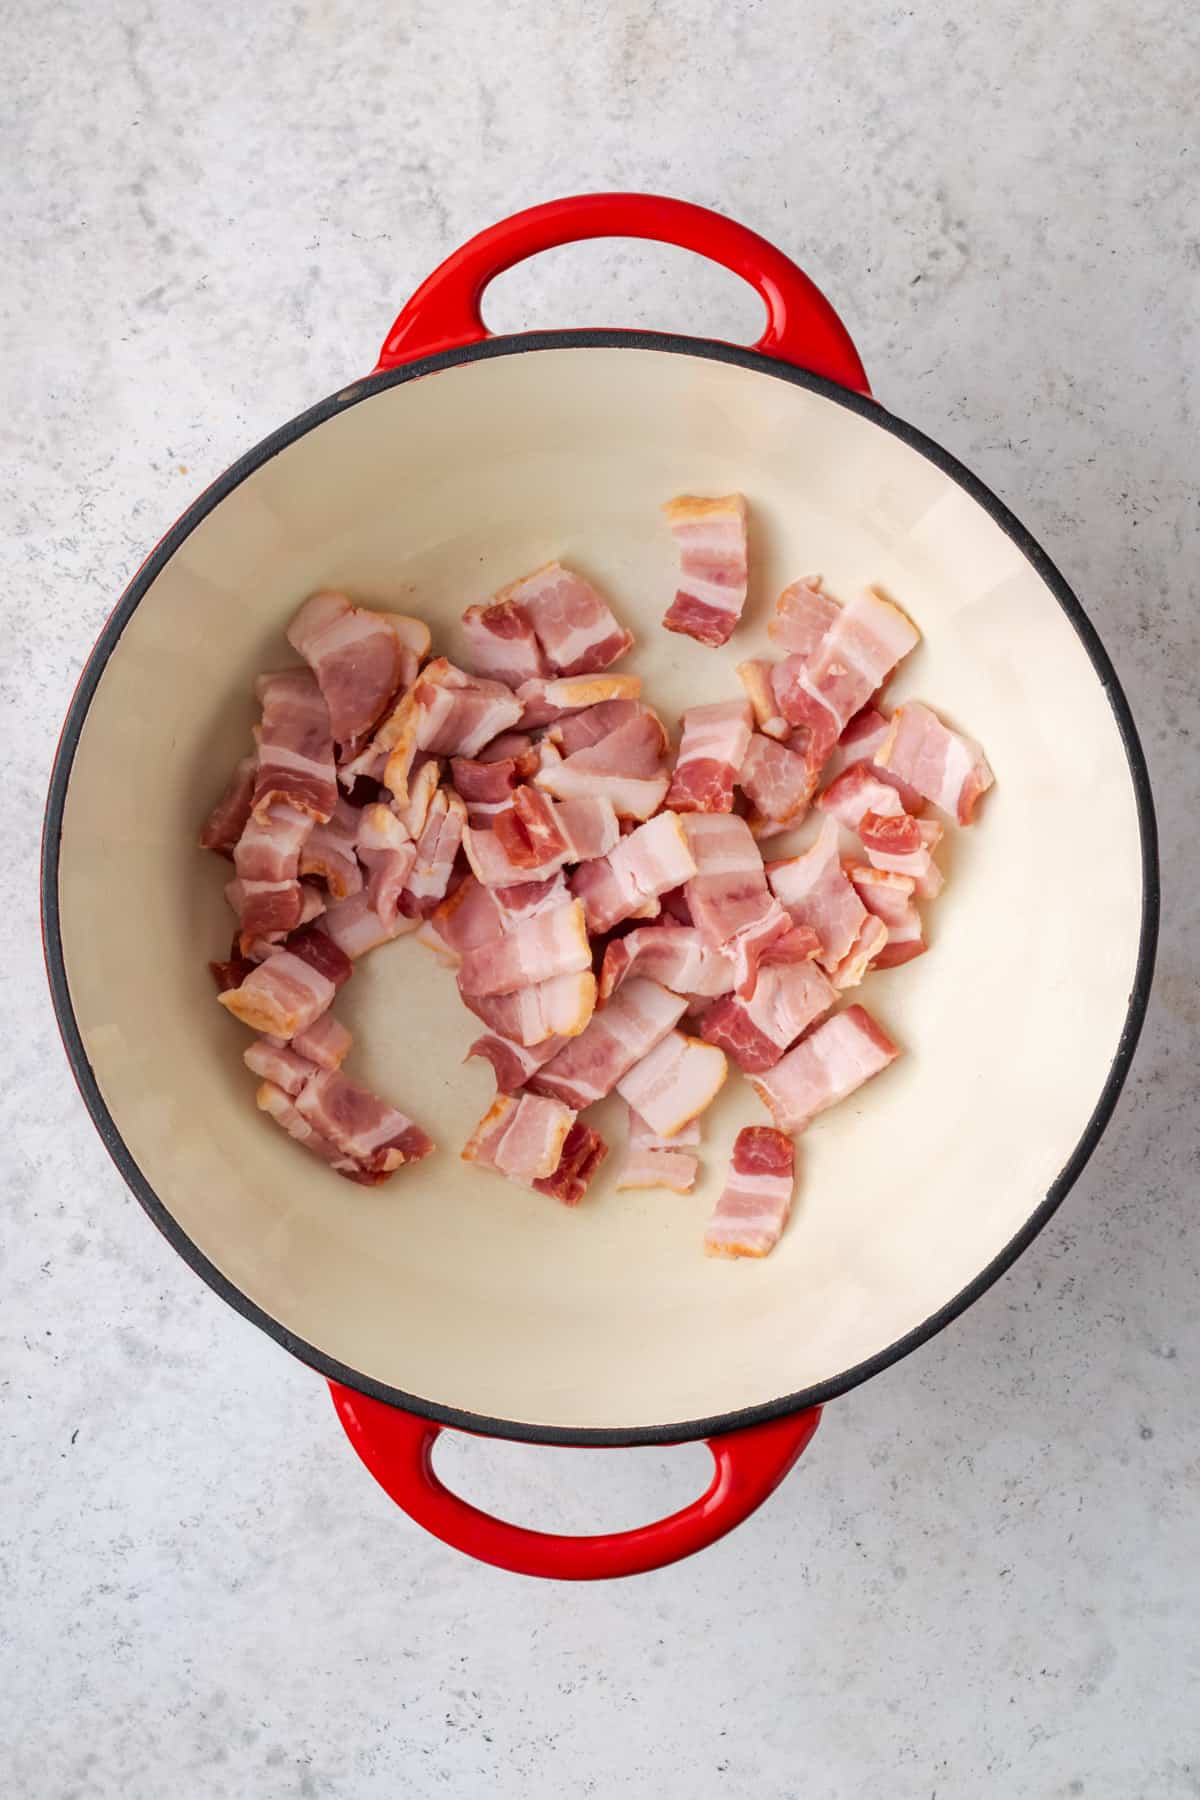 Pieces of bacon being cooked in a large soup pot.